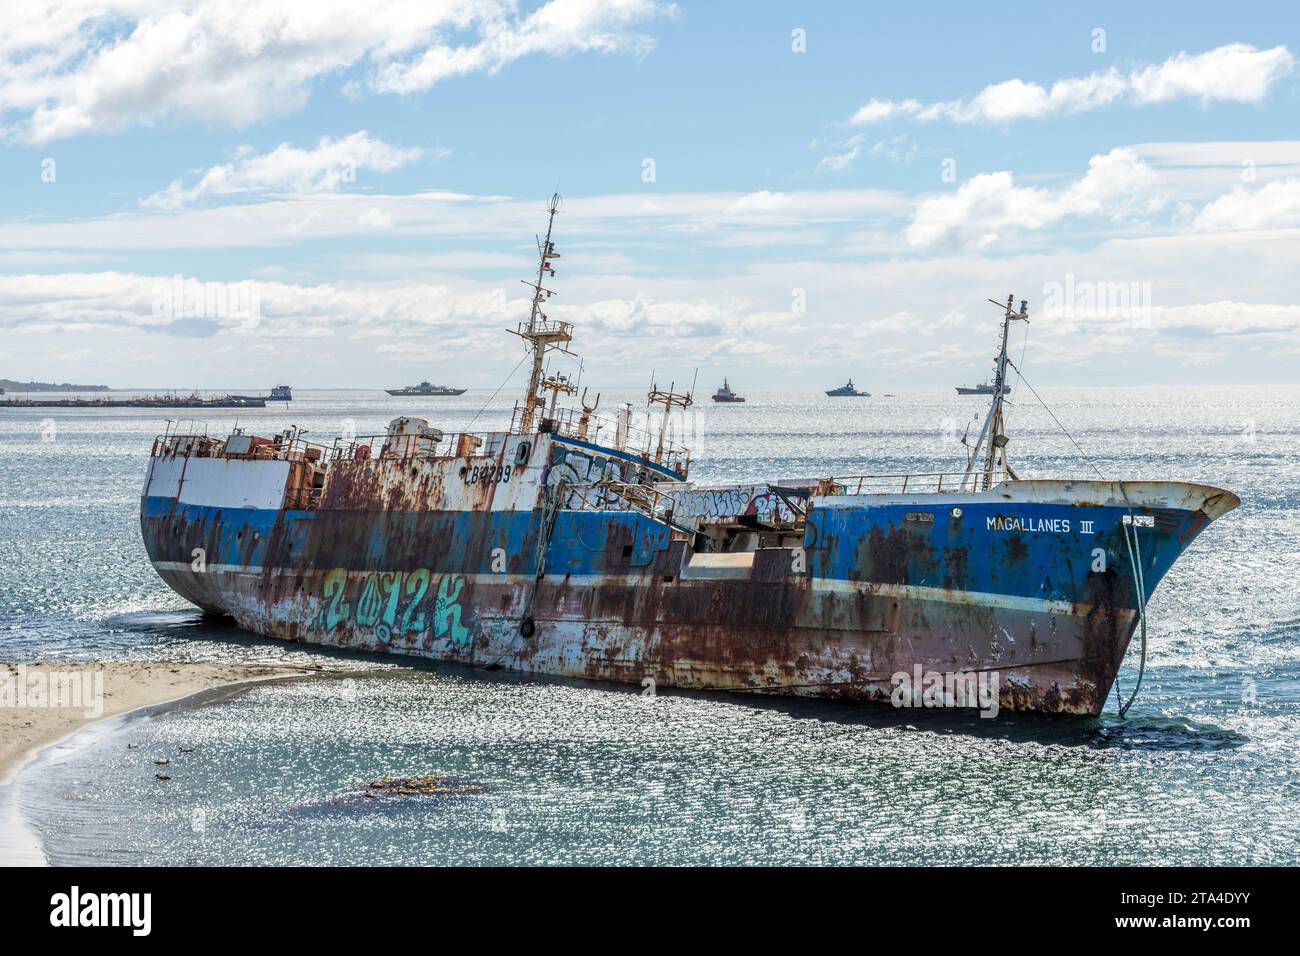 The wreck of the Magallanes II in Punta Arenas, Chile. A 1970 Japanese built fishing vessel. Stock Photo